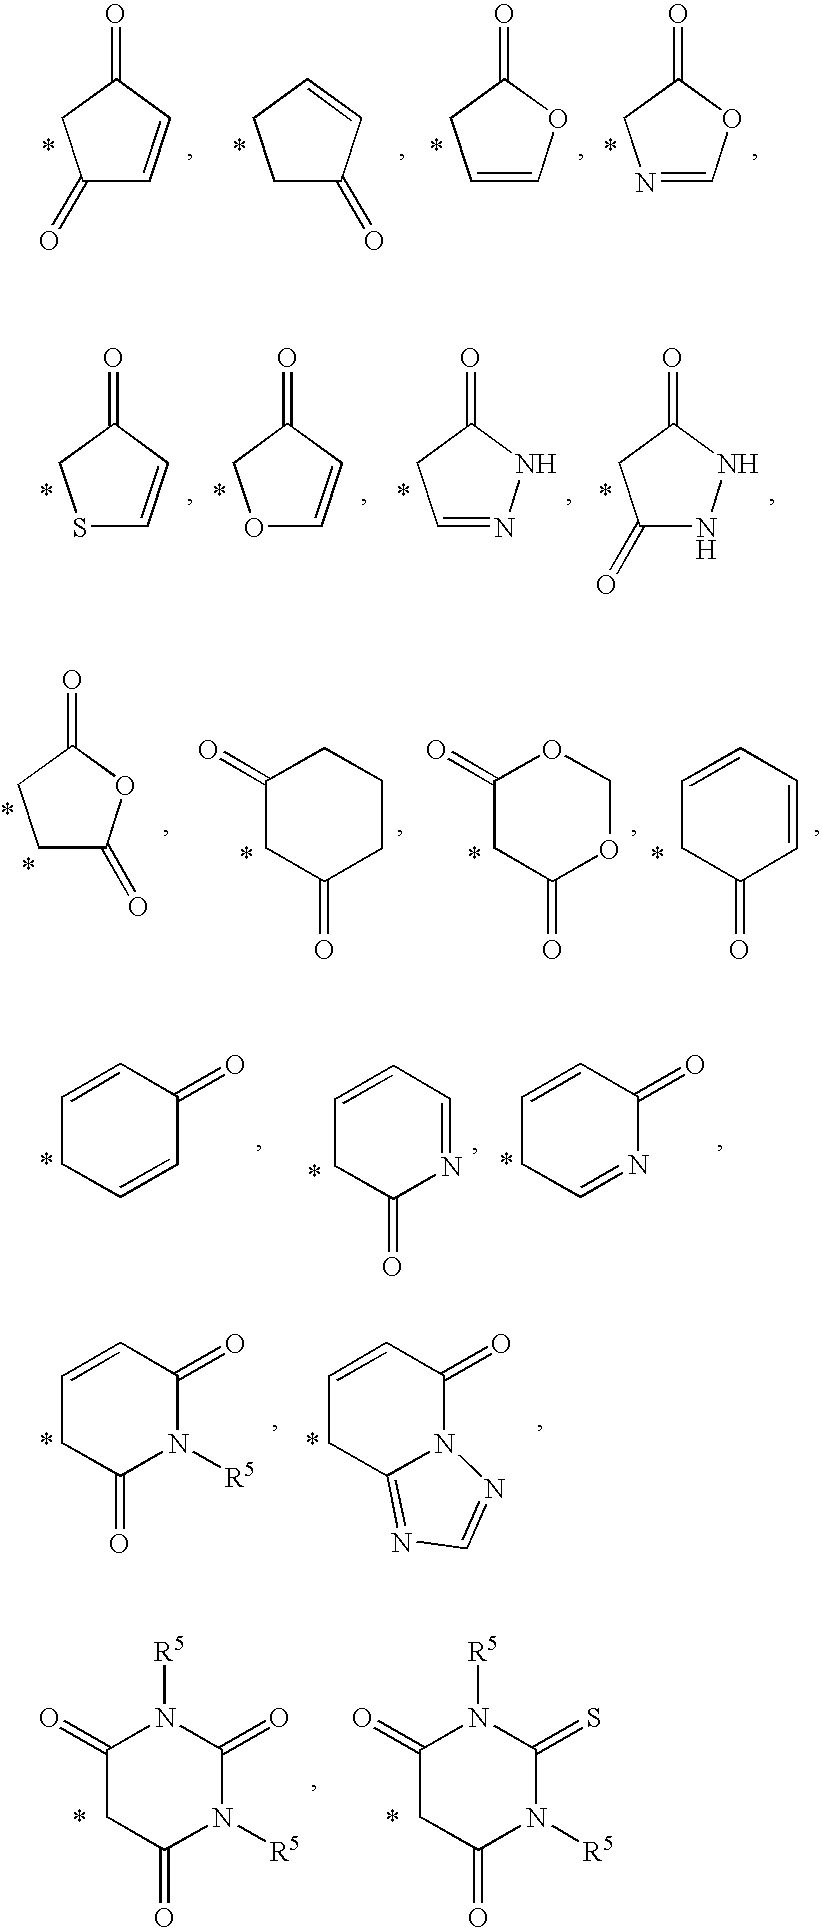 Optical data medium containing; in the information layer, a dye as a light-absorbing compound